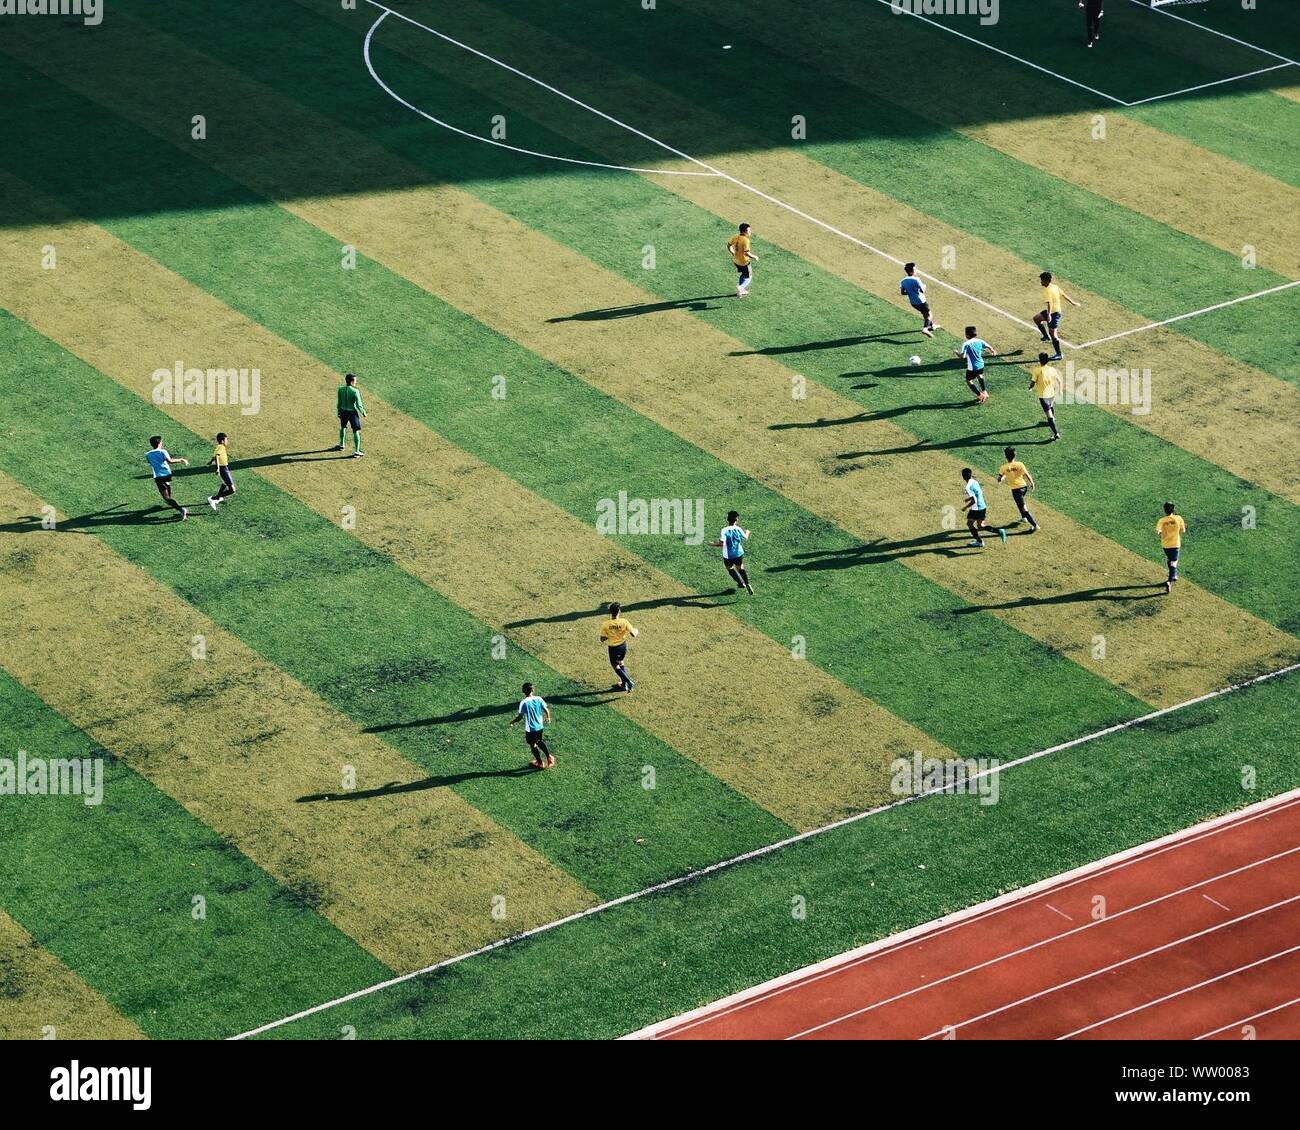 High Angle View of Soccer Player jouer sur terrain Banque D'Images